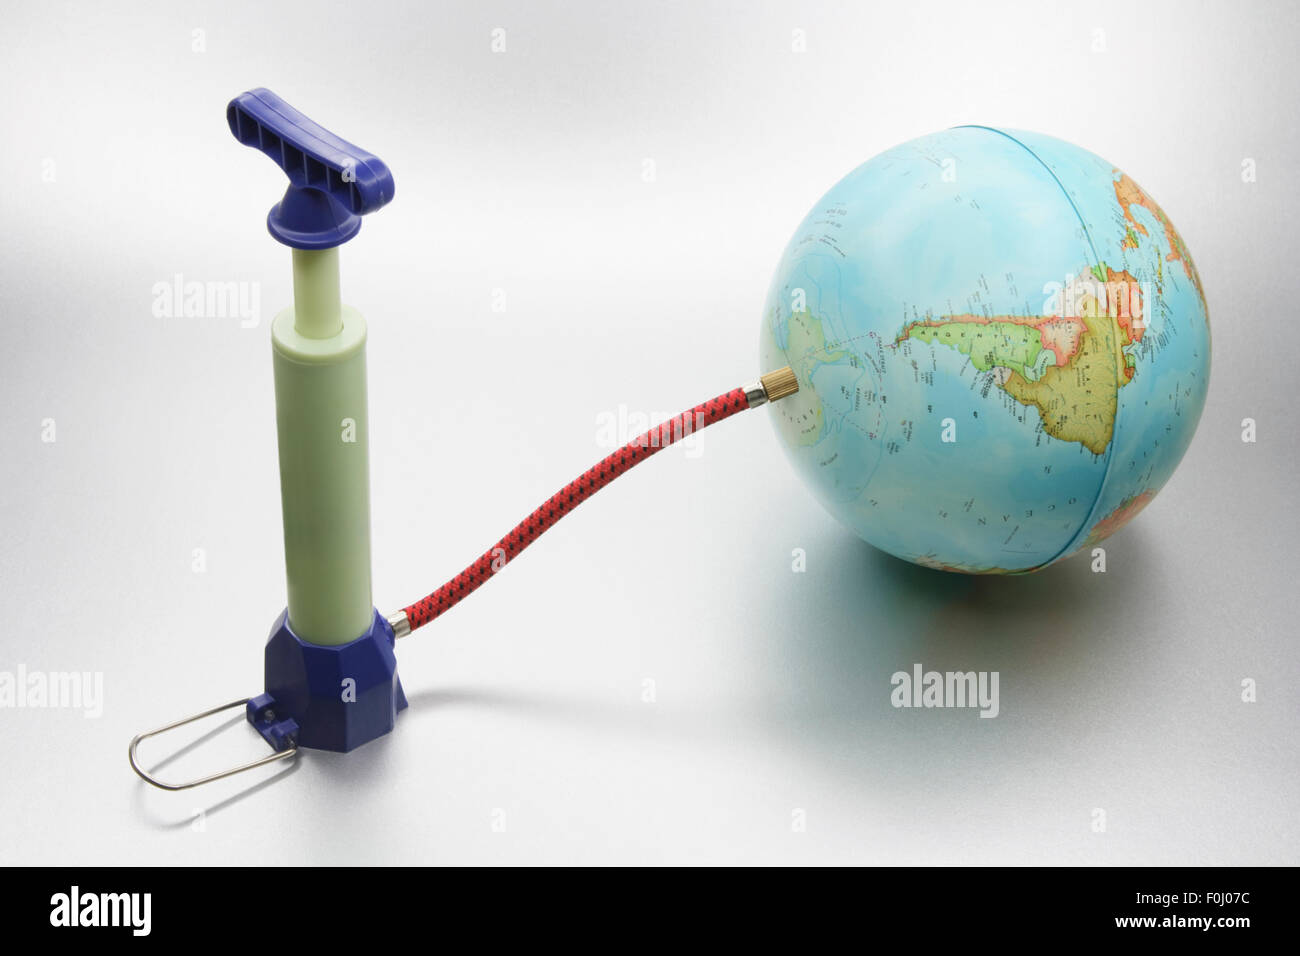 Miniature Pump Attached to Globe Stock Photo